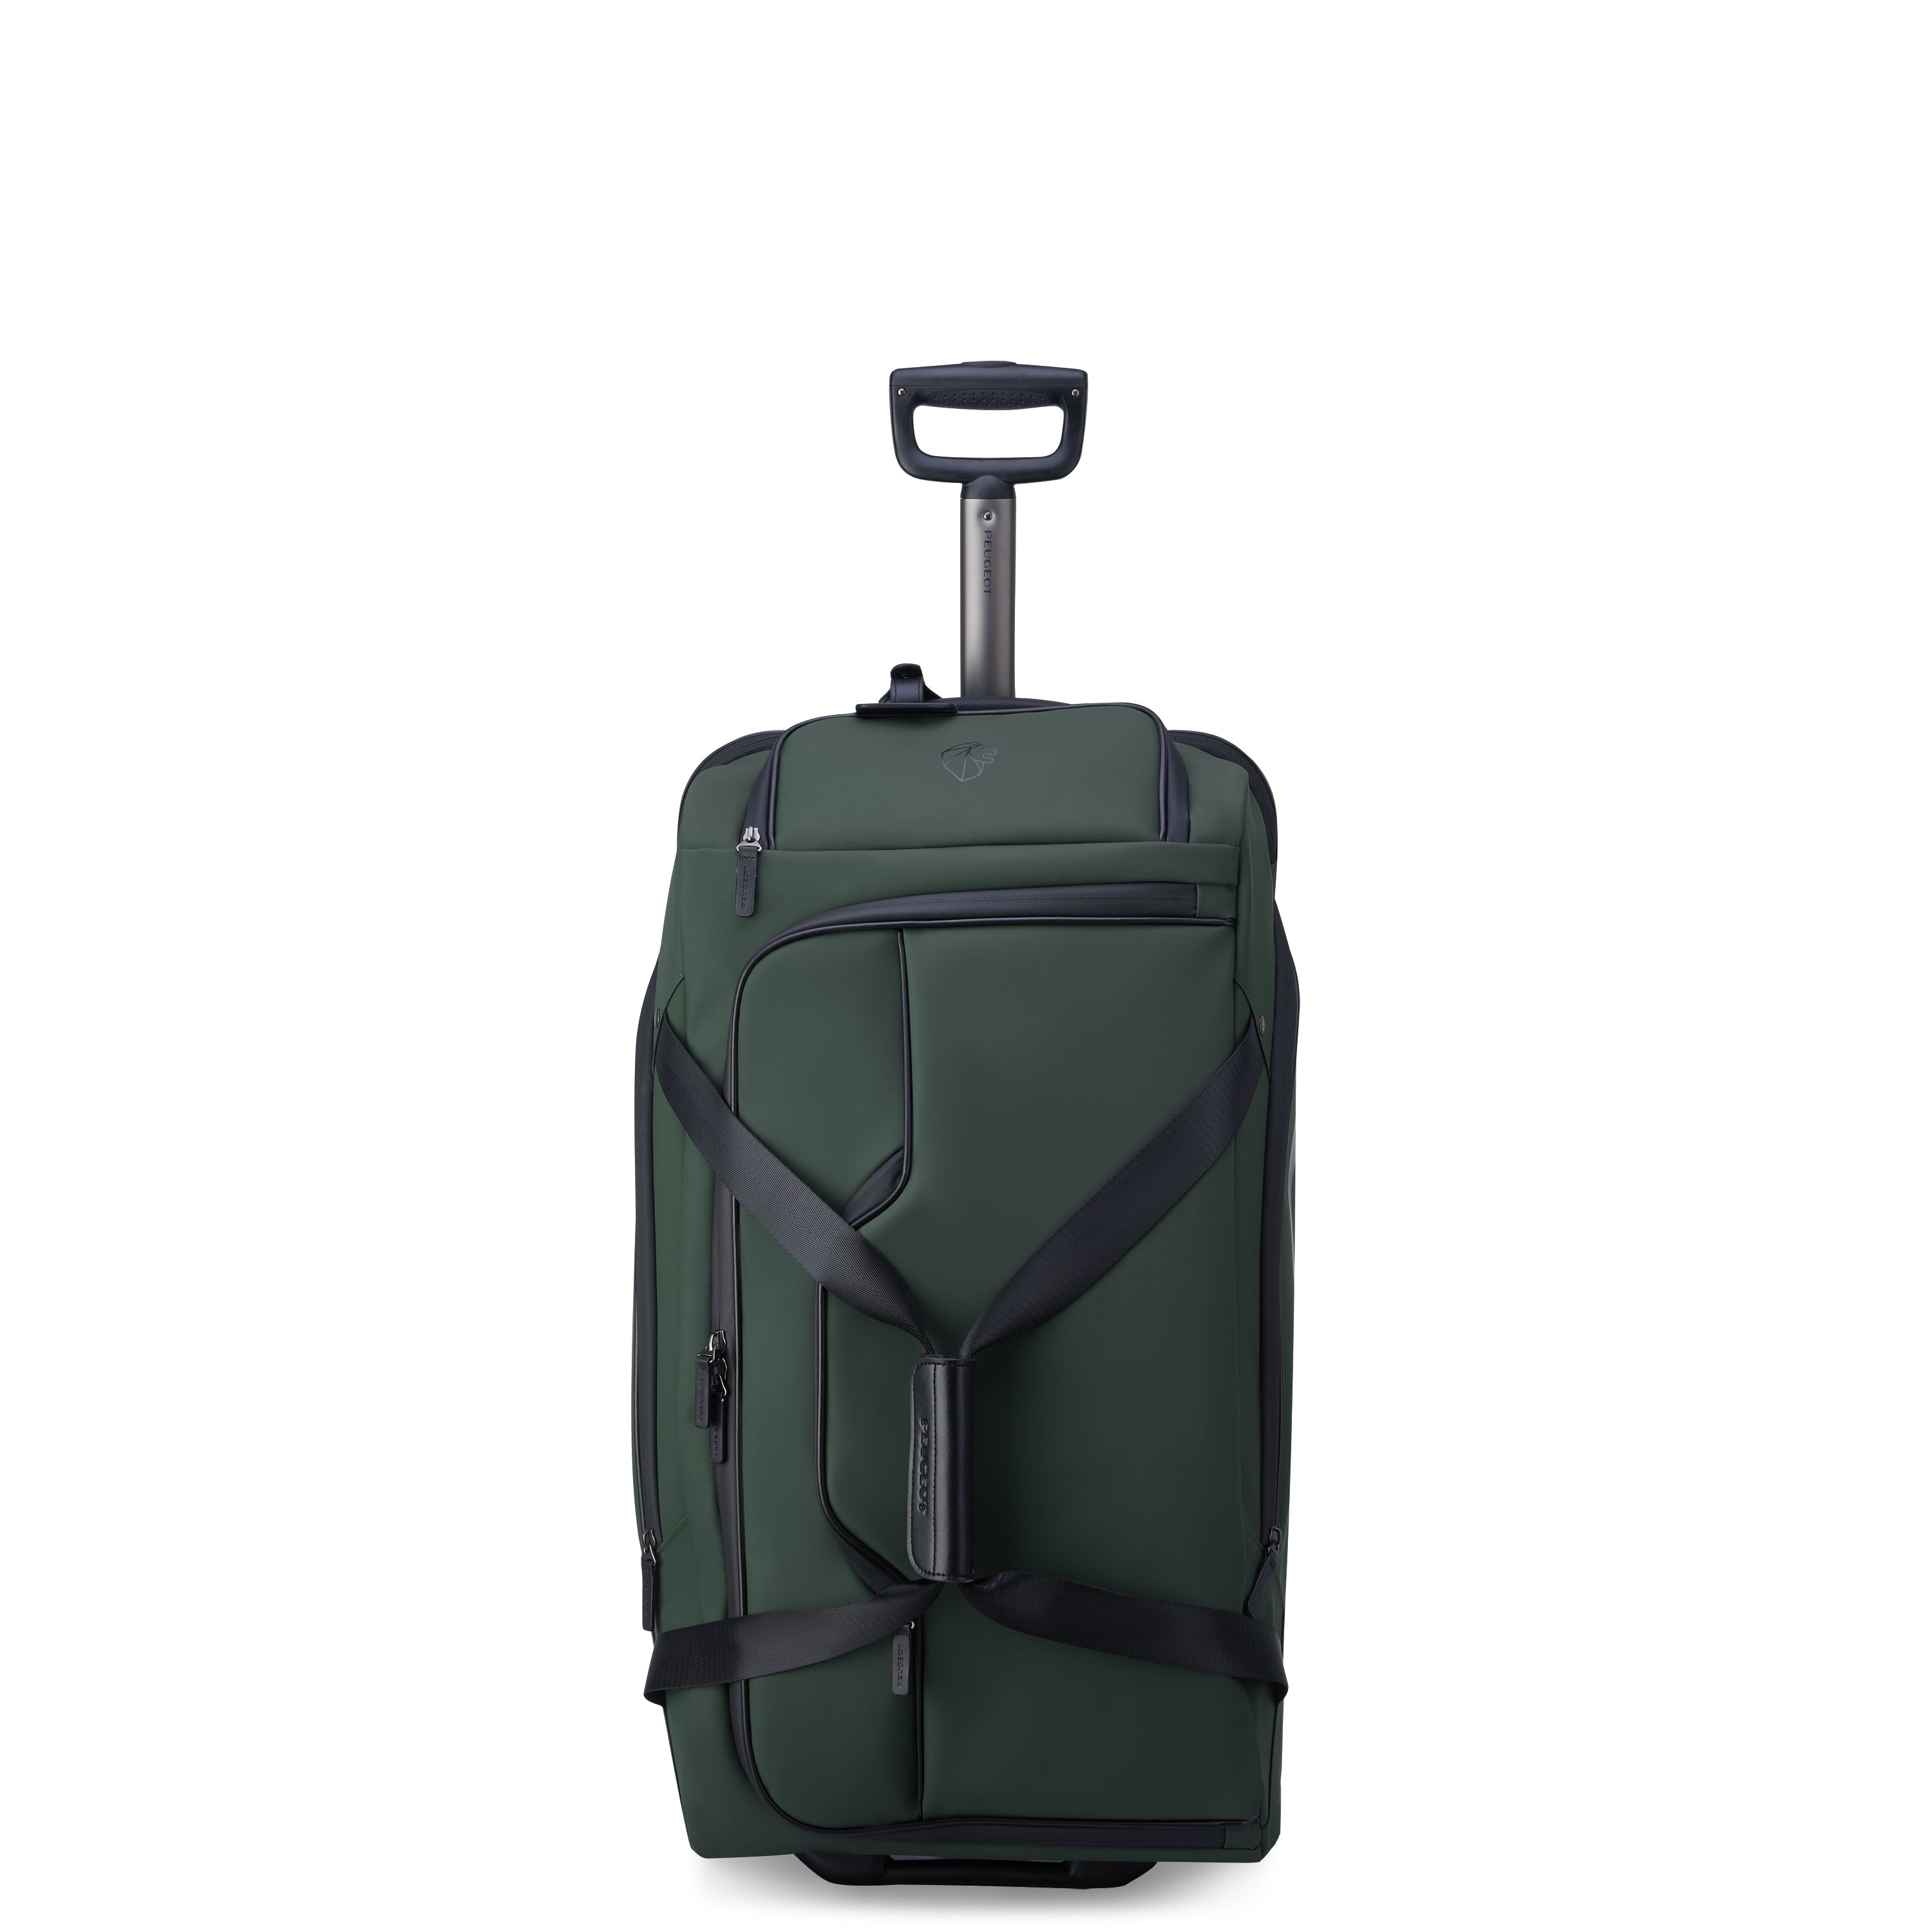 Peugeot Voyages Travel 70cm Softcase 2 Wheel Hybrid Check-In Luggage Duffle Trolley